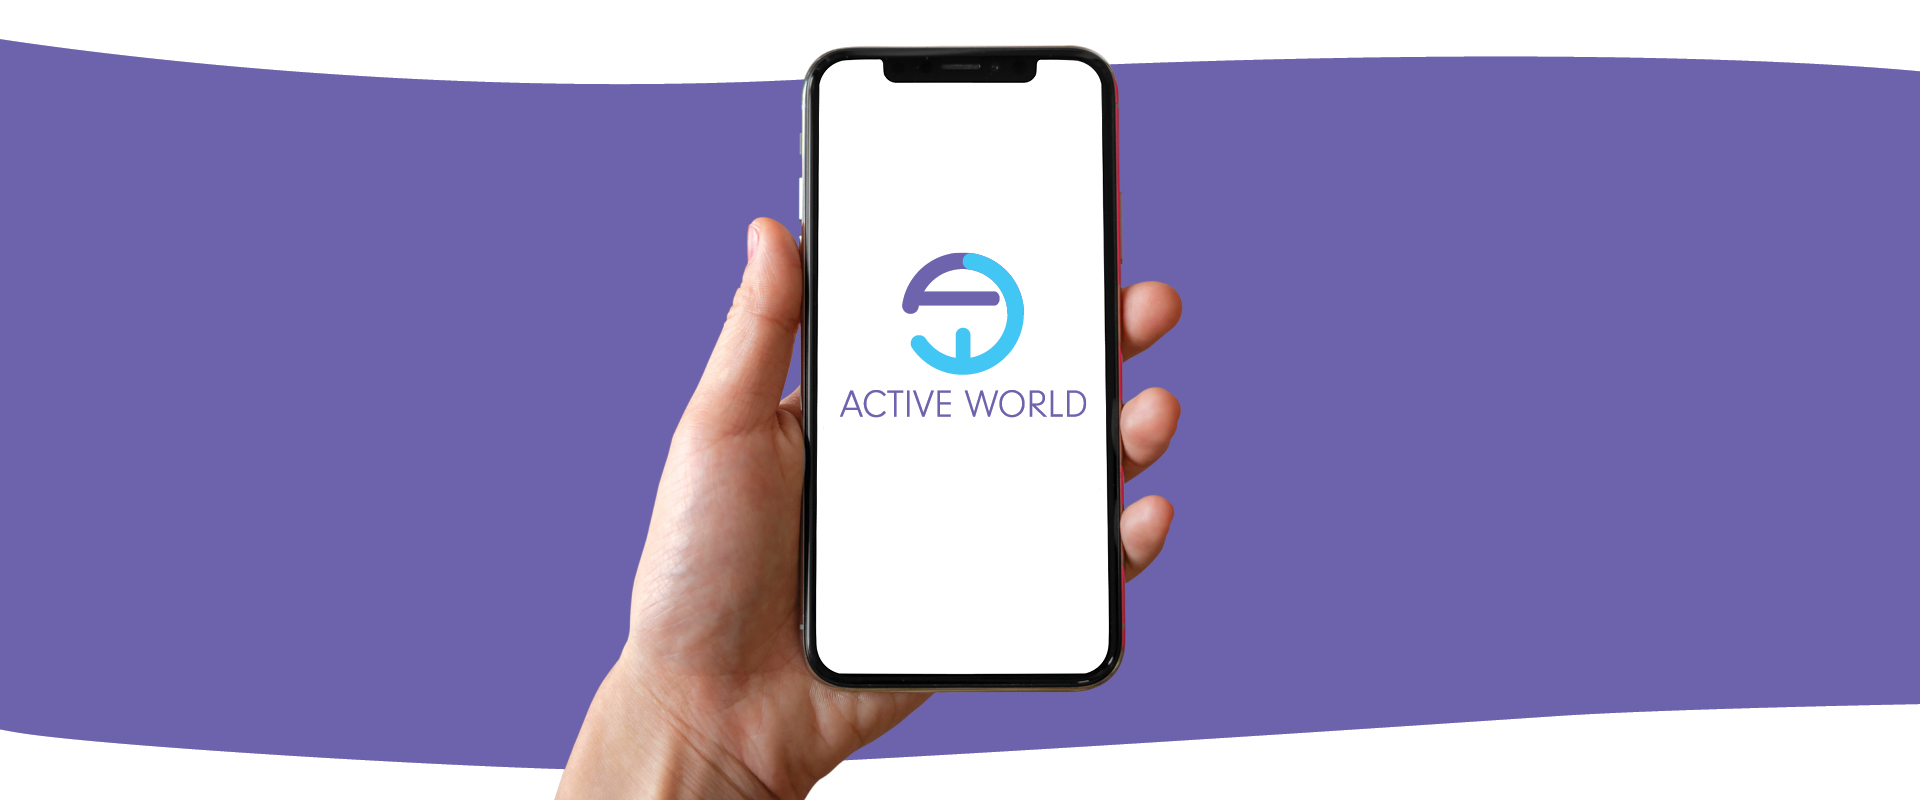 Active World mobile app